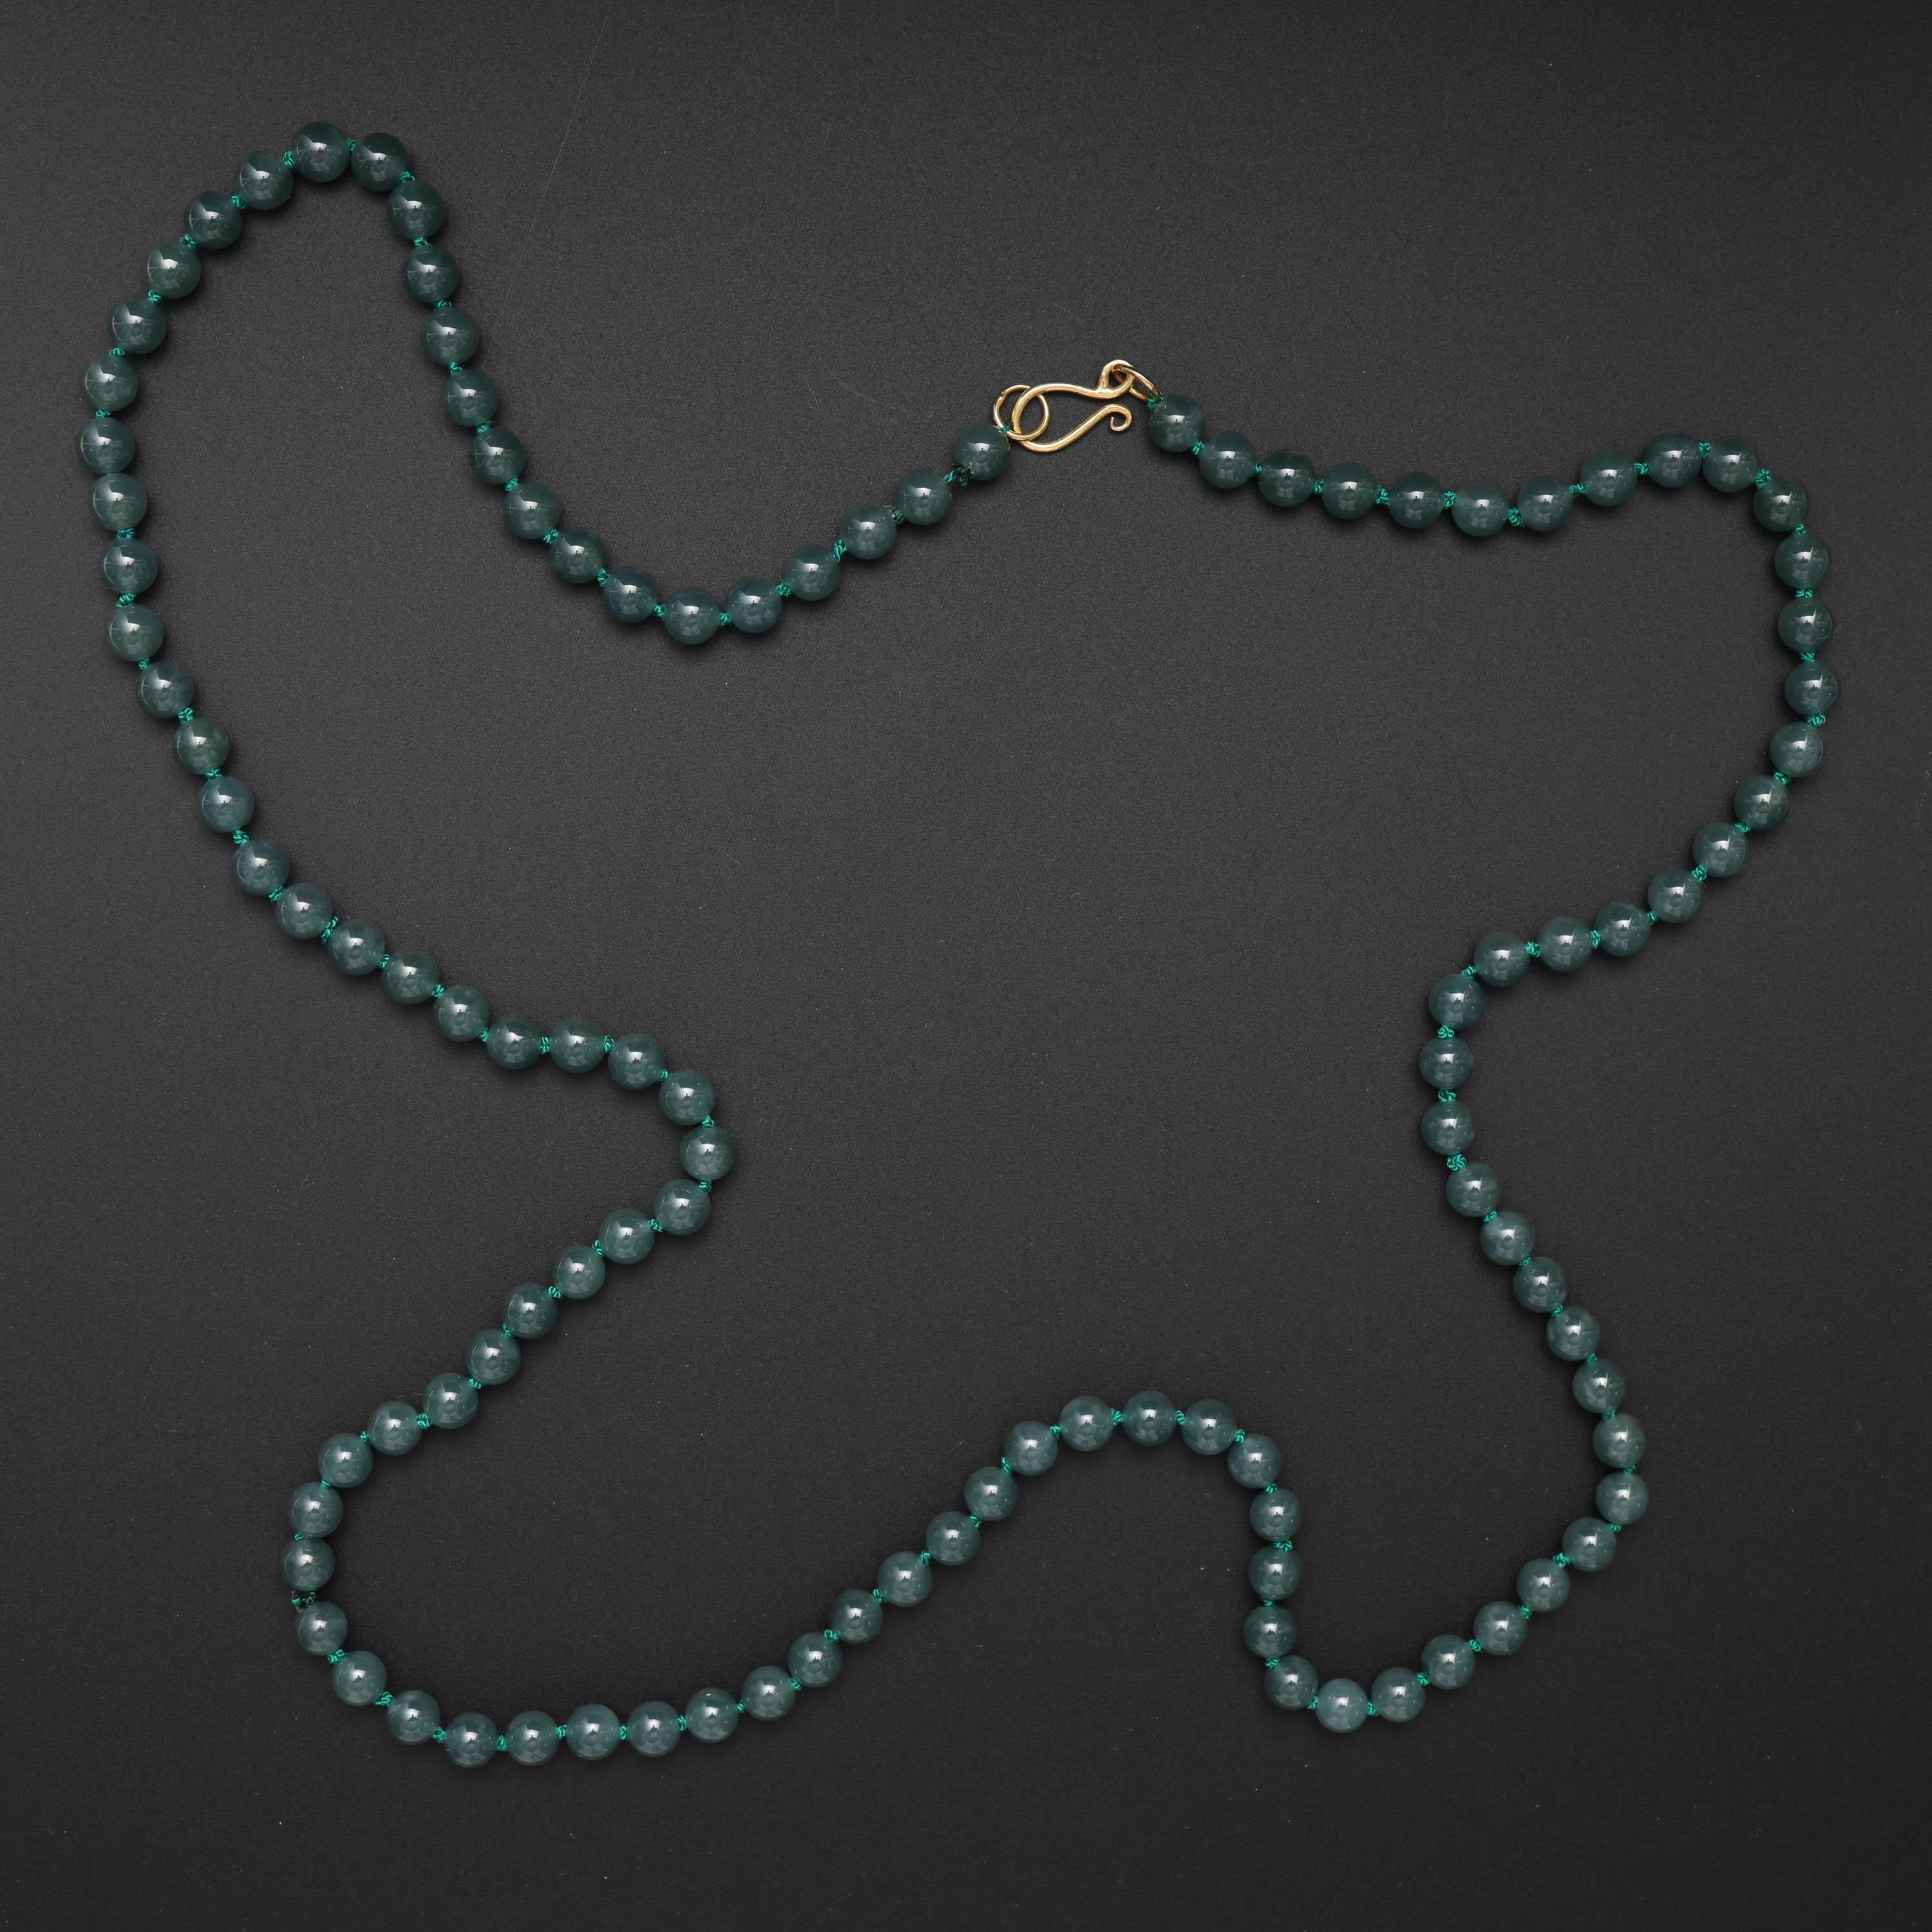 An absolutely stunning jade bead necklace of translucent bluish-green certified natural and untreated jadeite jade beads. These extraordinarily translucent beads are a most uncommon shade of bluish-green. They are so exceptionally translucent they